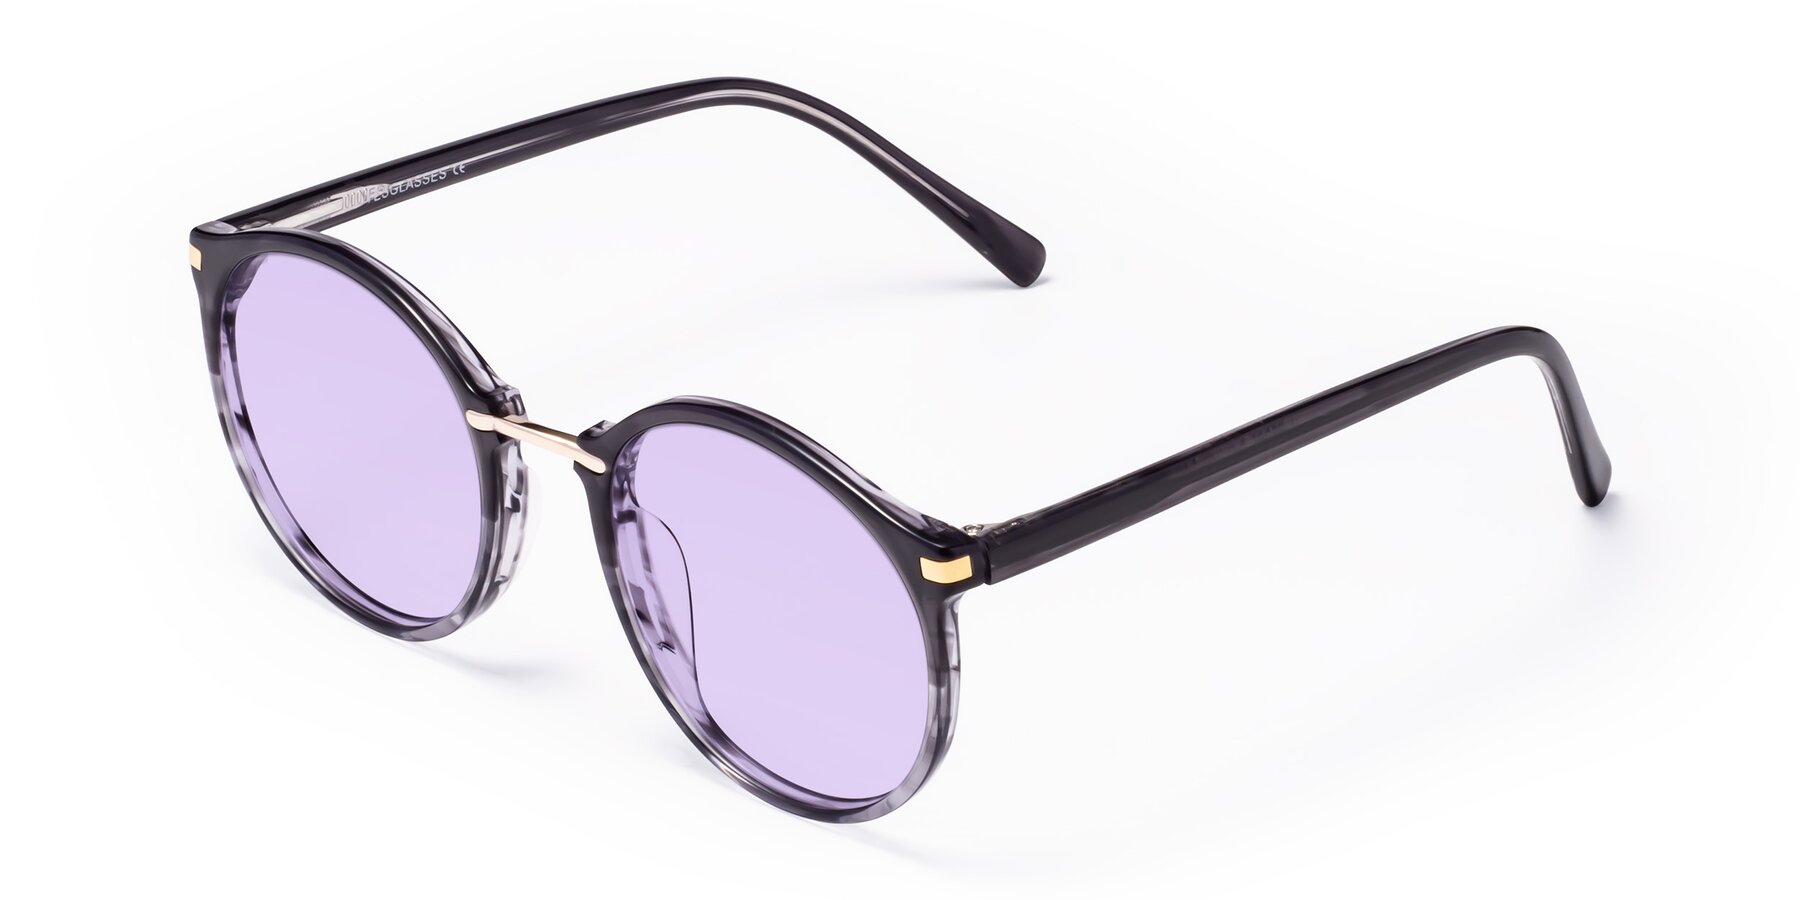 Angle of Casper in Translucent Black with Light Purple Tinted Lenses